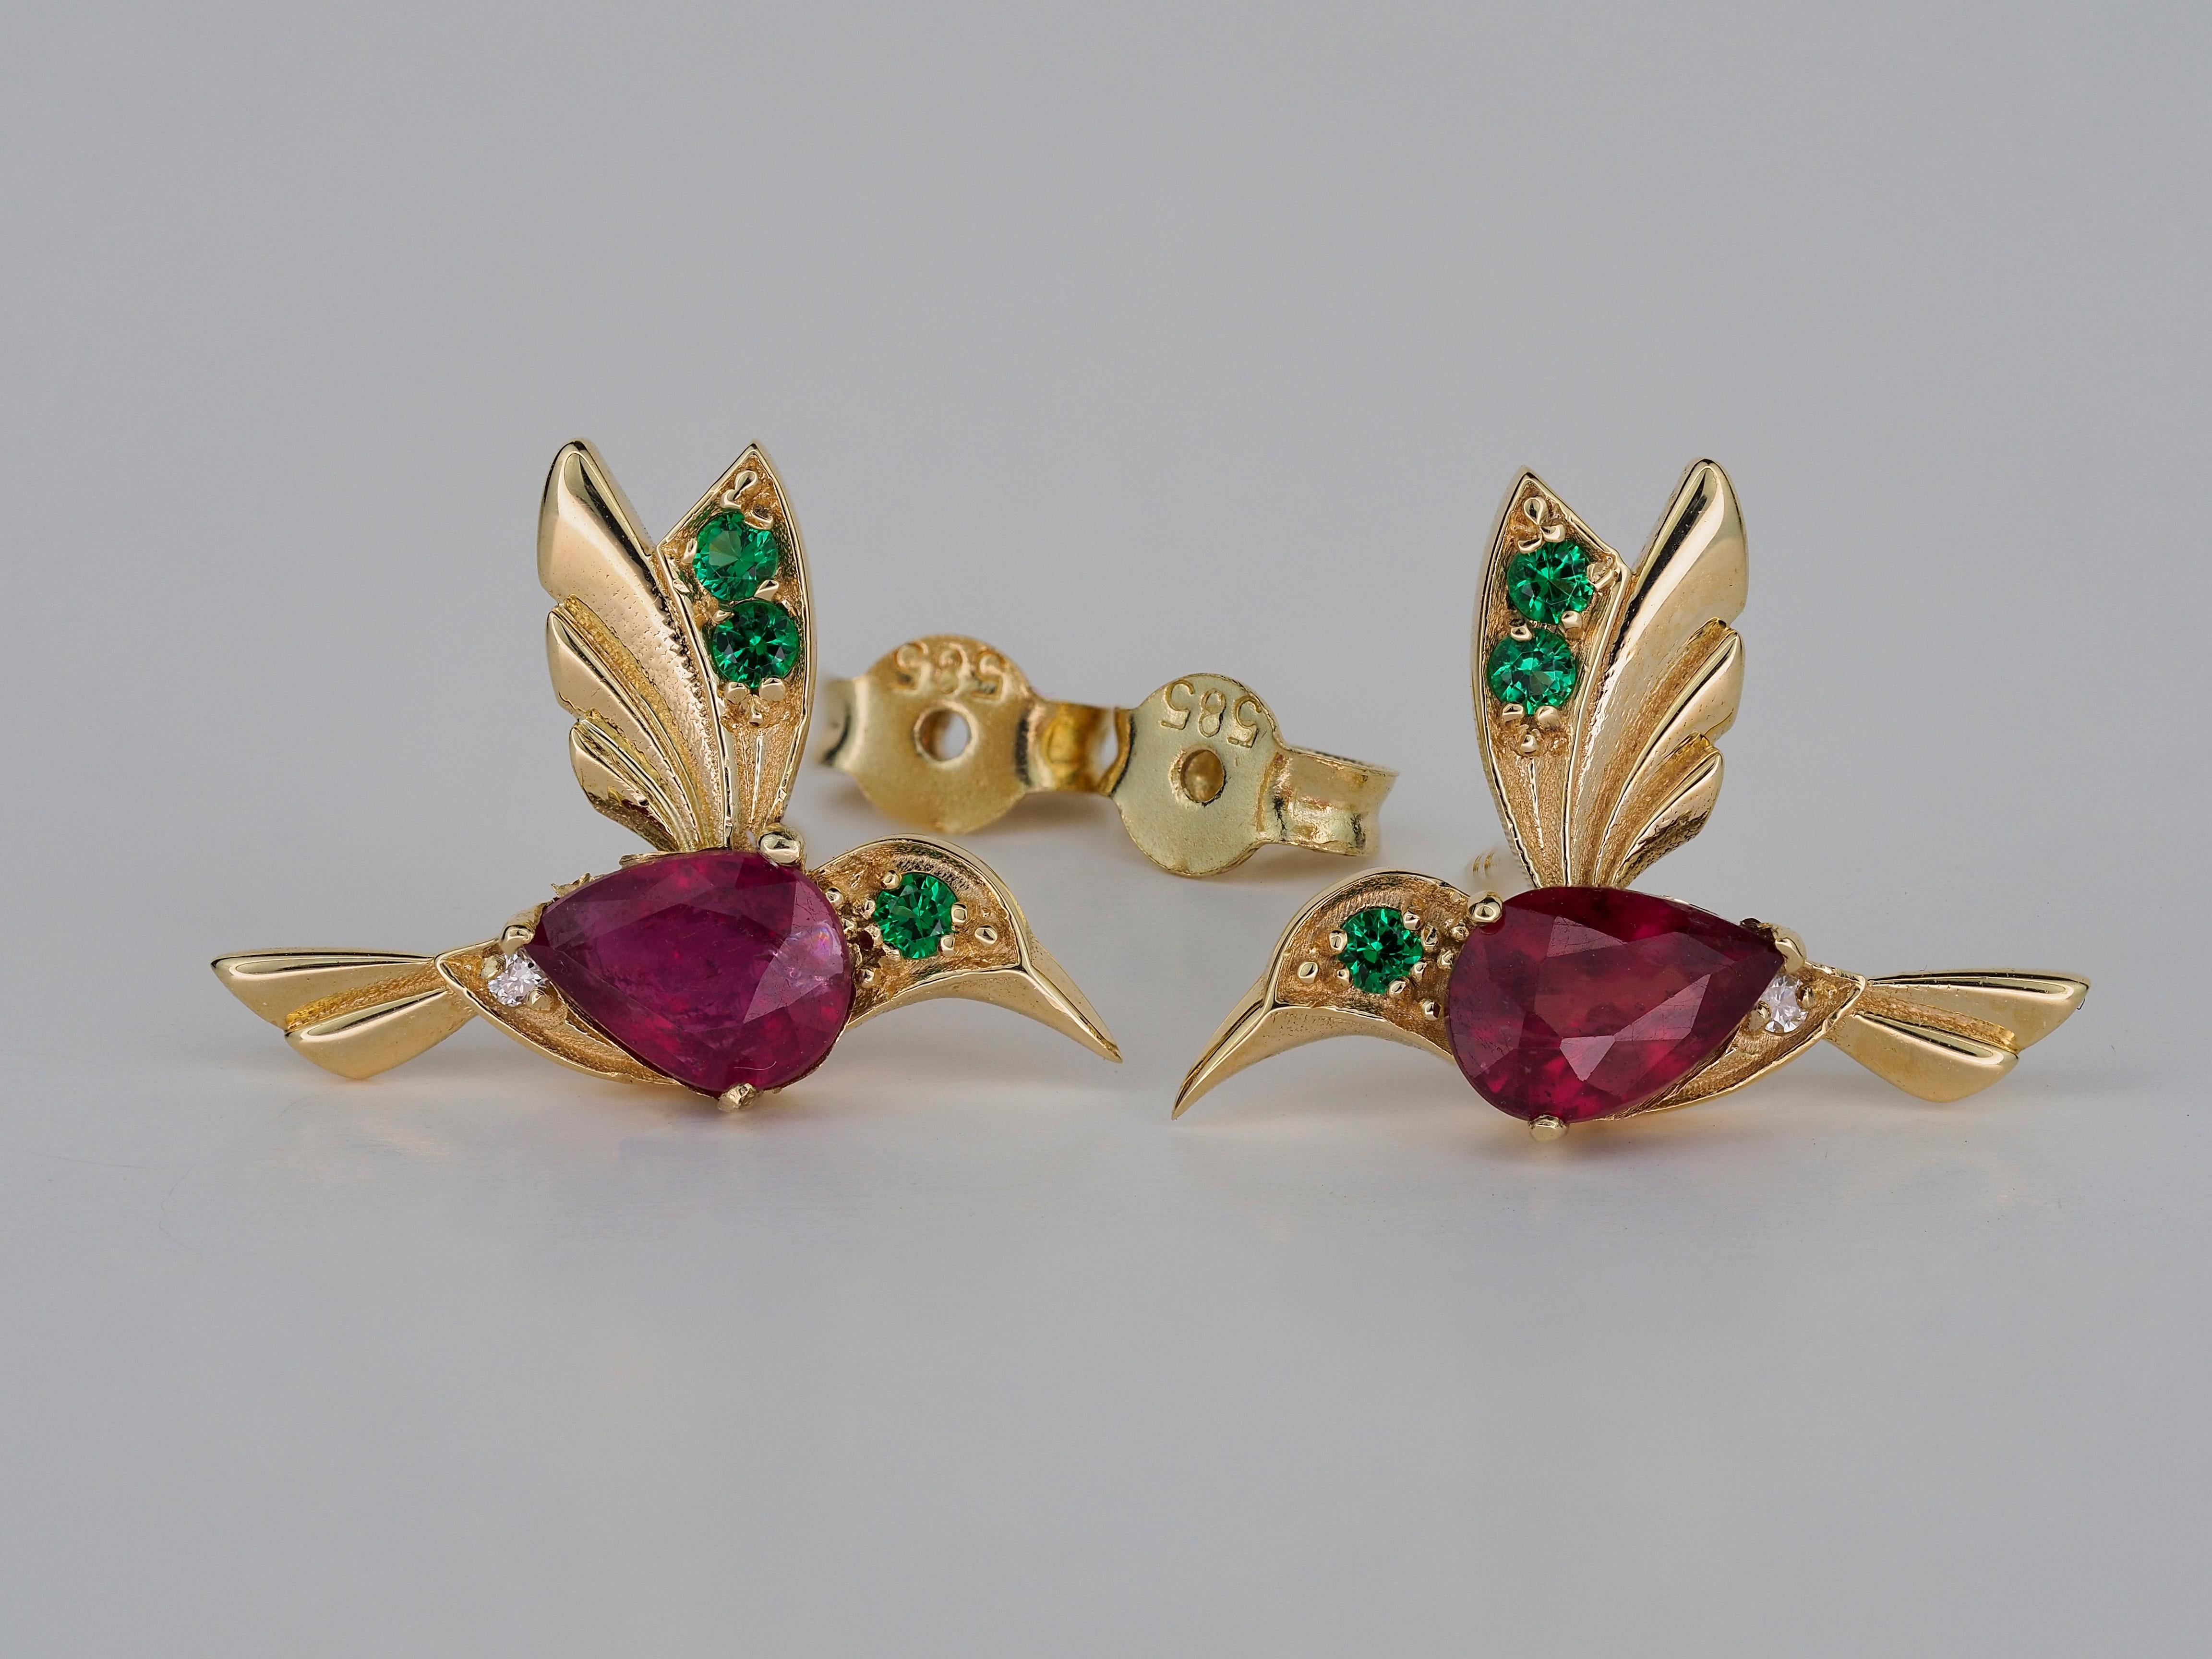 Women's or Men's 14k Gold Hummingbird Earings Studs with Rubies, Bird Stud Earrings with Gems ! For Sale